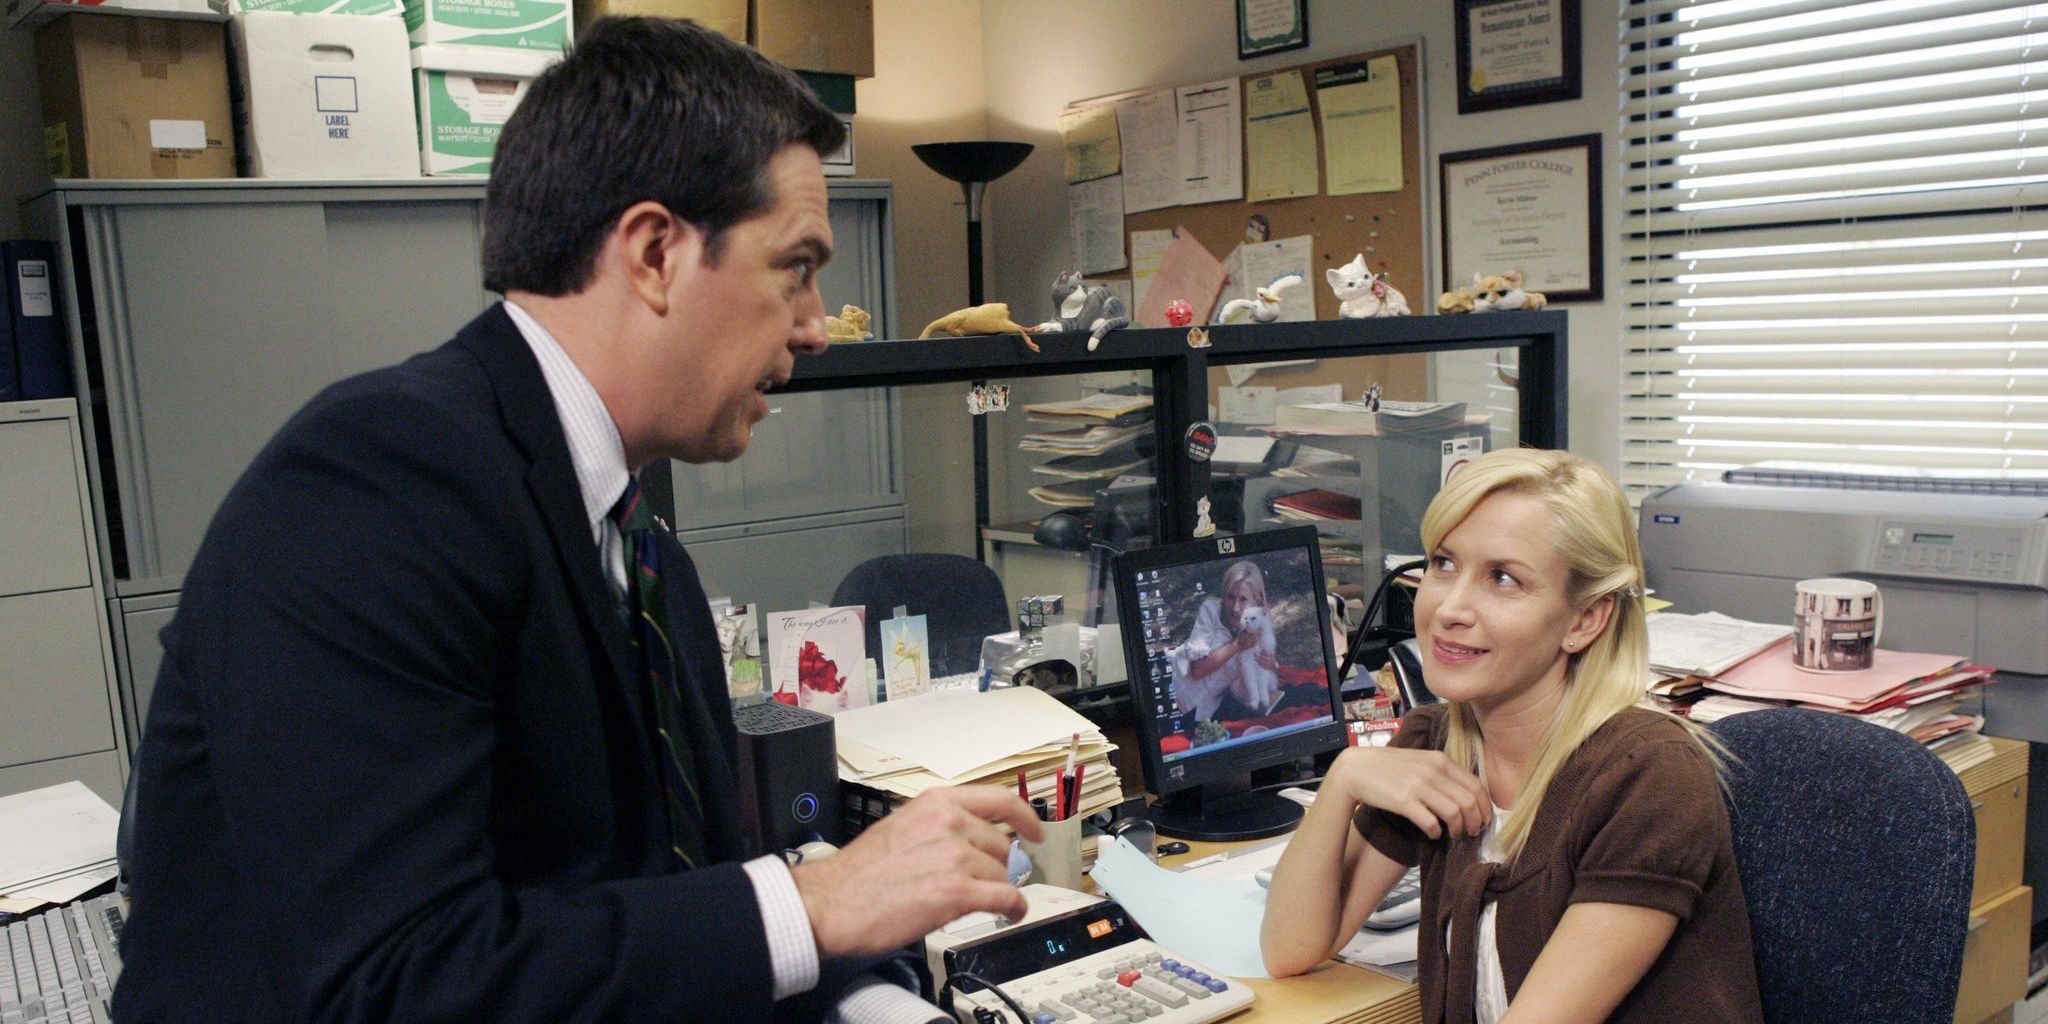 Andy and Angela talking over her desk in The Office